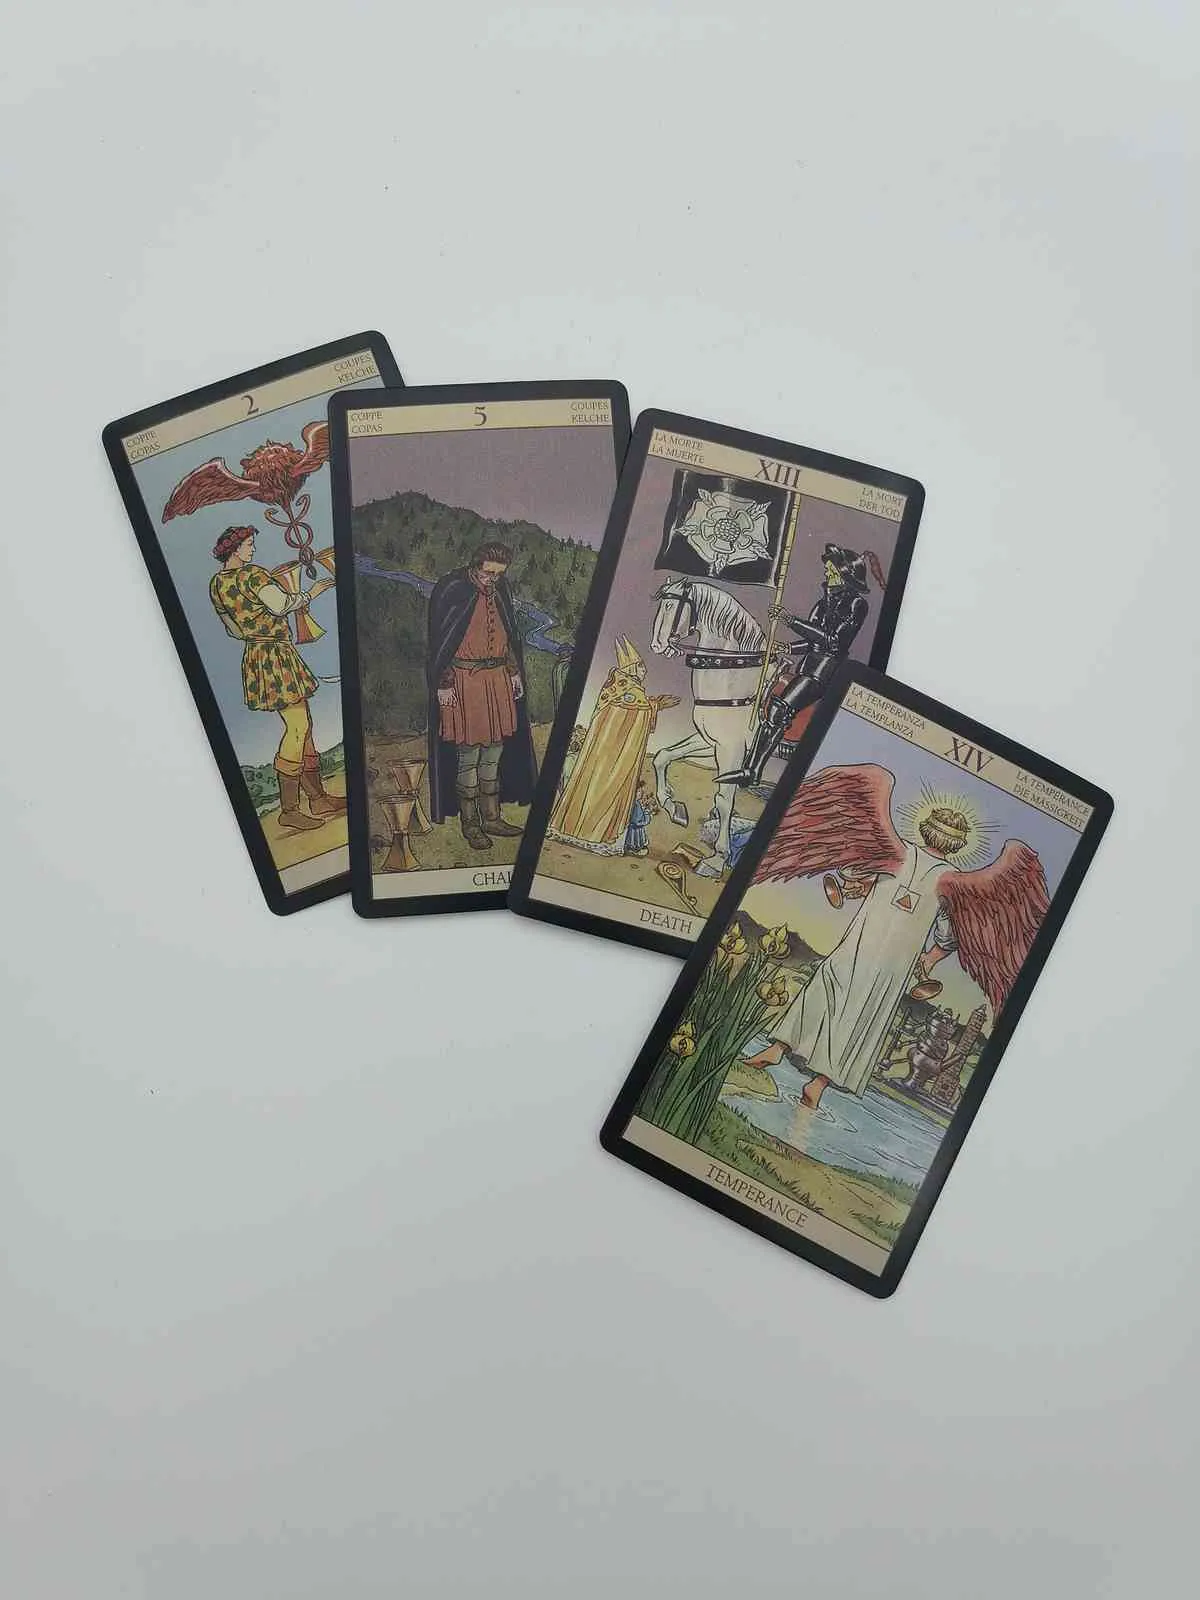 Flash Card Knight Tarot Mystical Divination oracles Cards Deck Fortune Telling Family Party Leisure Table Game.Deck saleSHDP